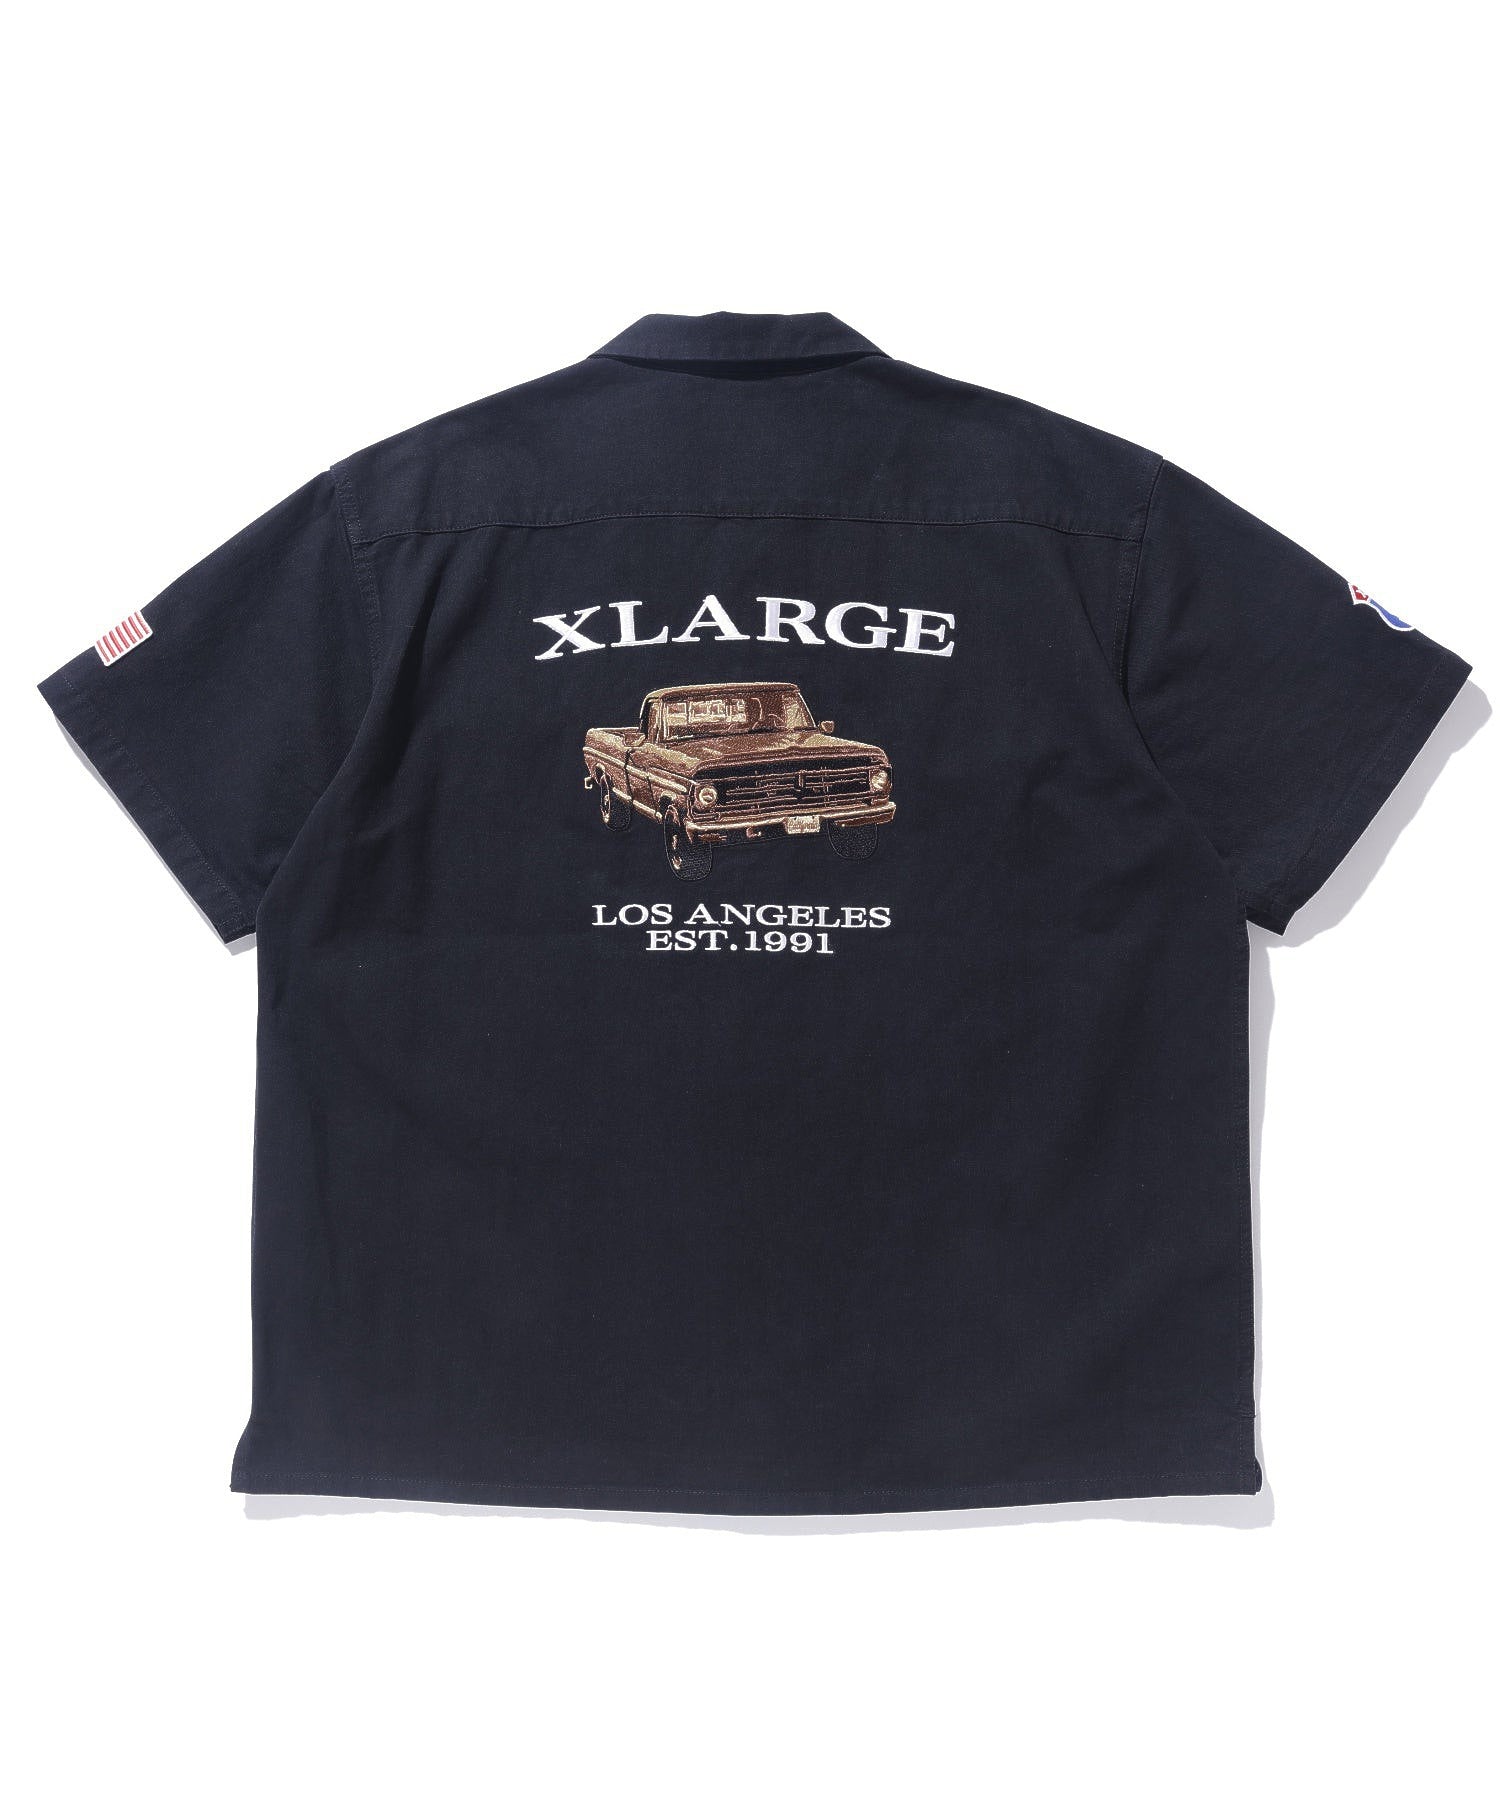 OLD PICK UP TRUCK S/S WORK SHIRT XLARGE – calif